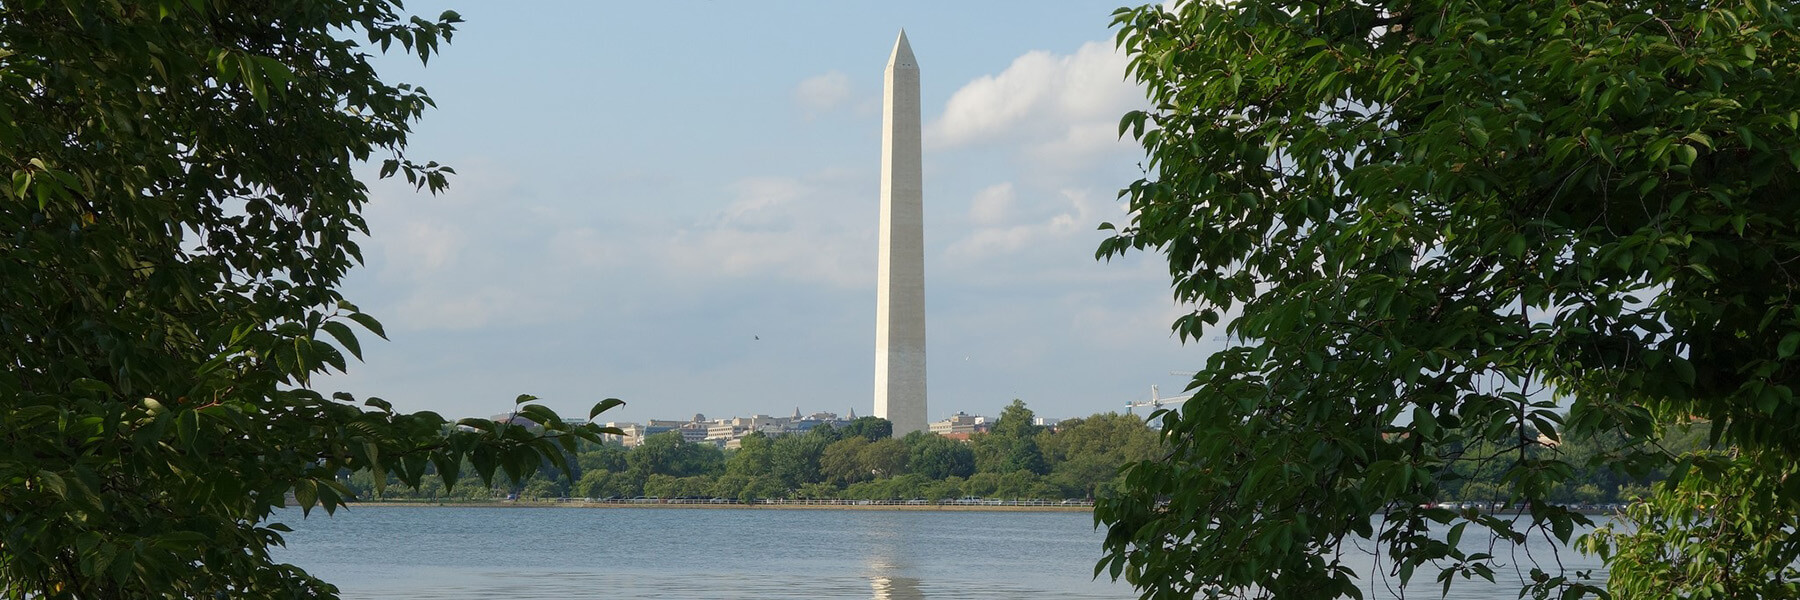 a view of the Washington Monument